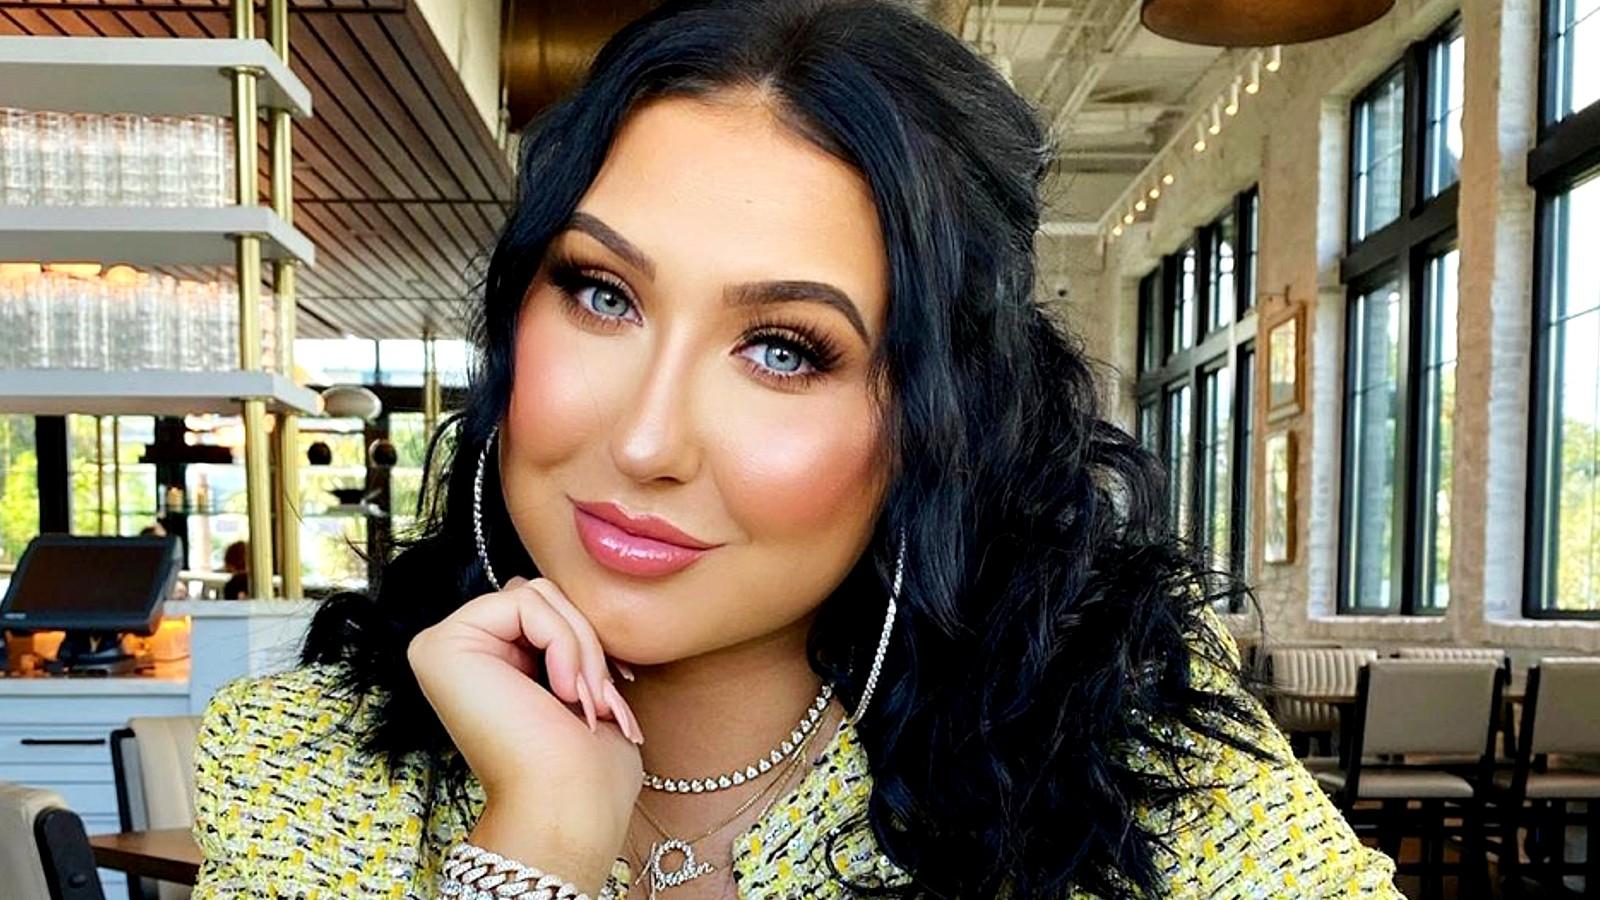 Jaclyn Hill poses with her head on her hand sitting down